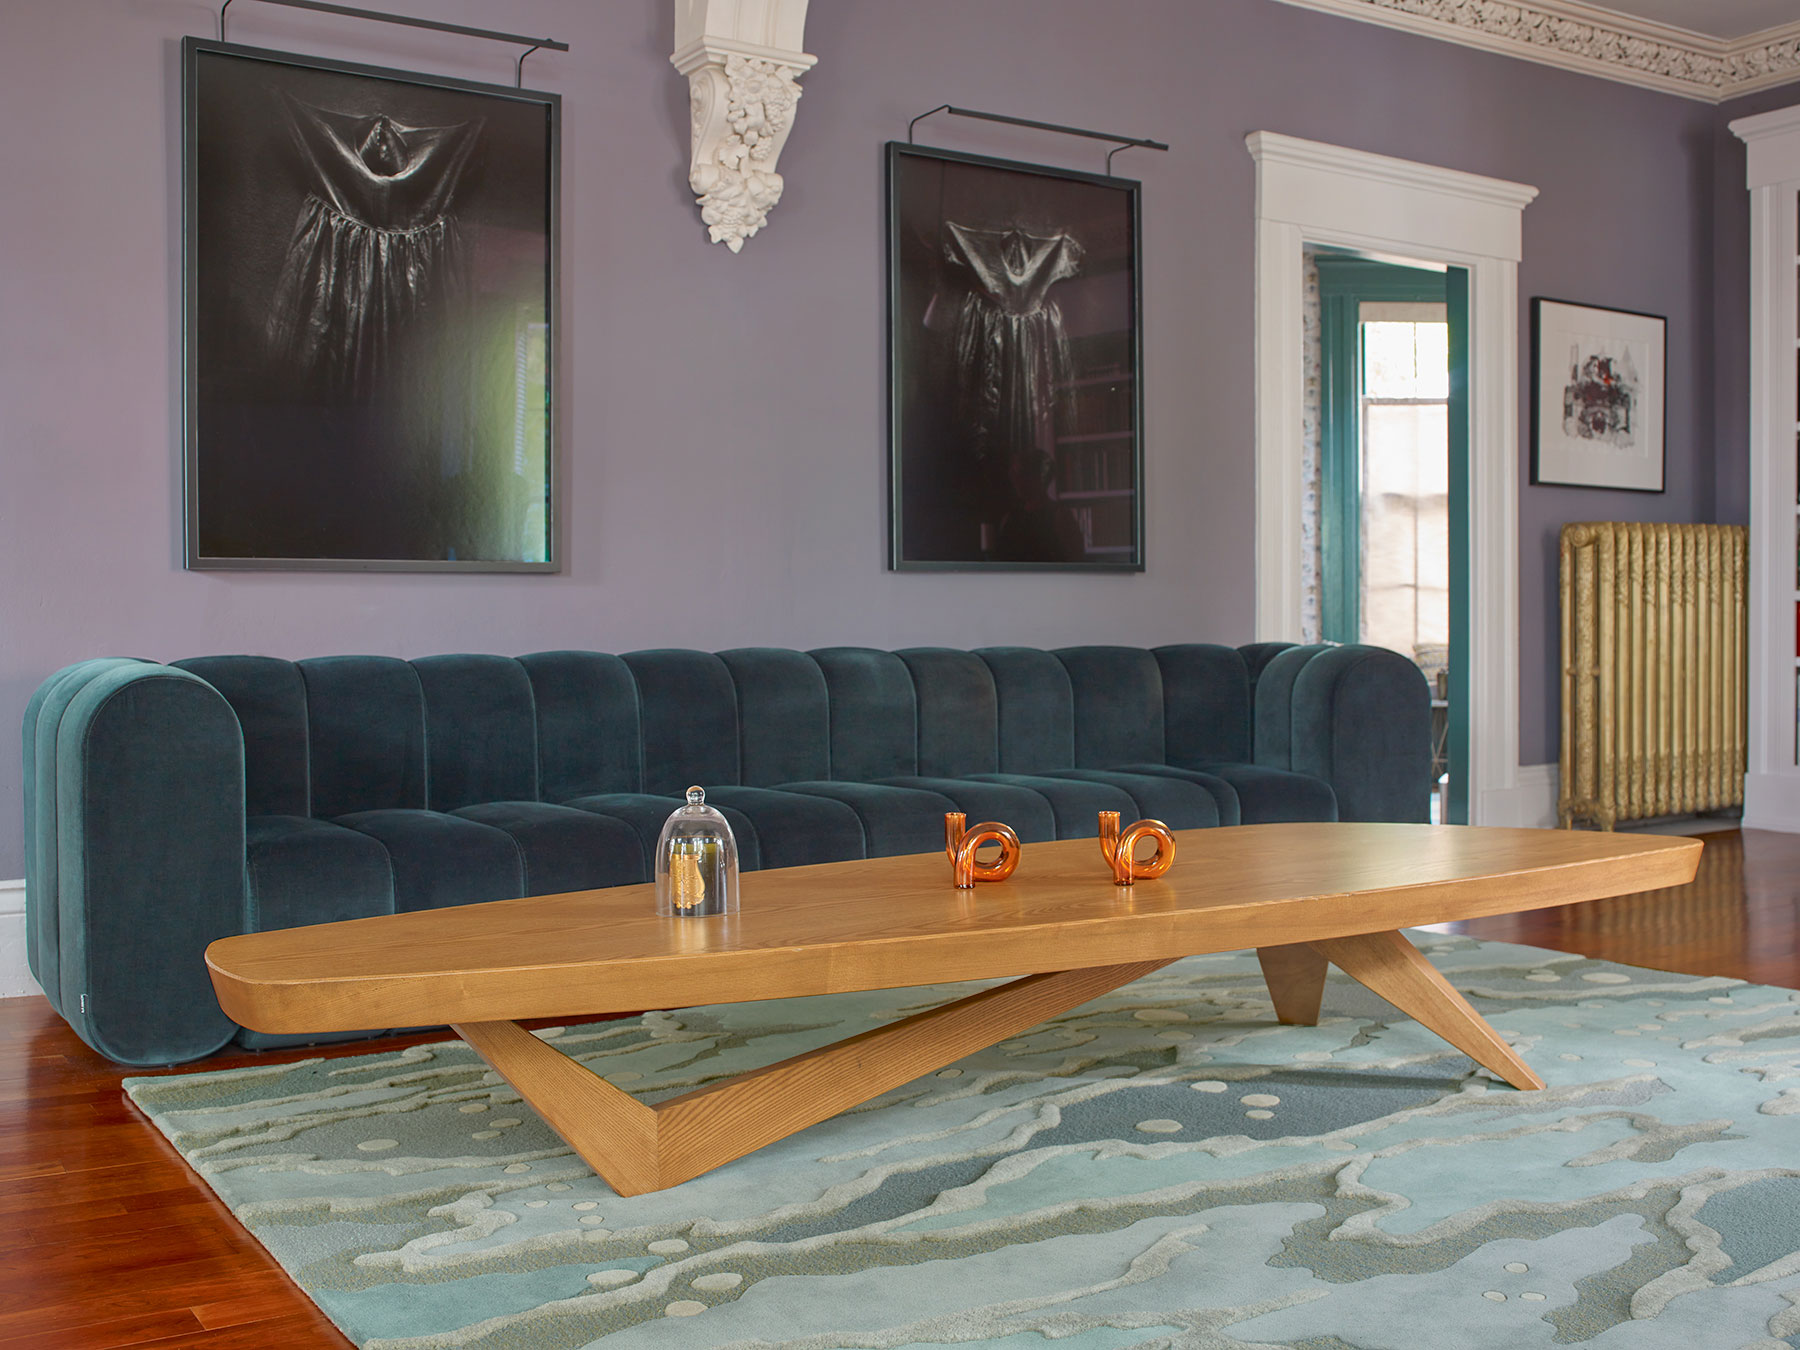 A contemporary living room in purple walls and wood table on an Angela Adams Ocean Rug